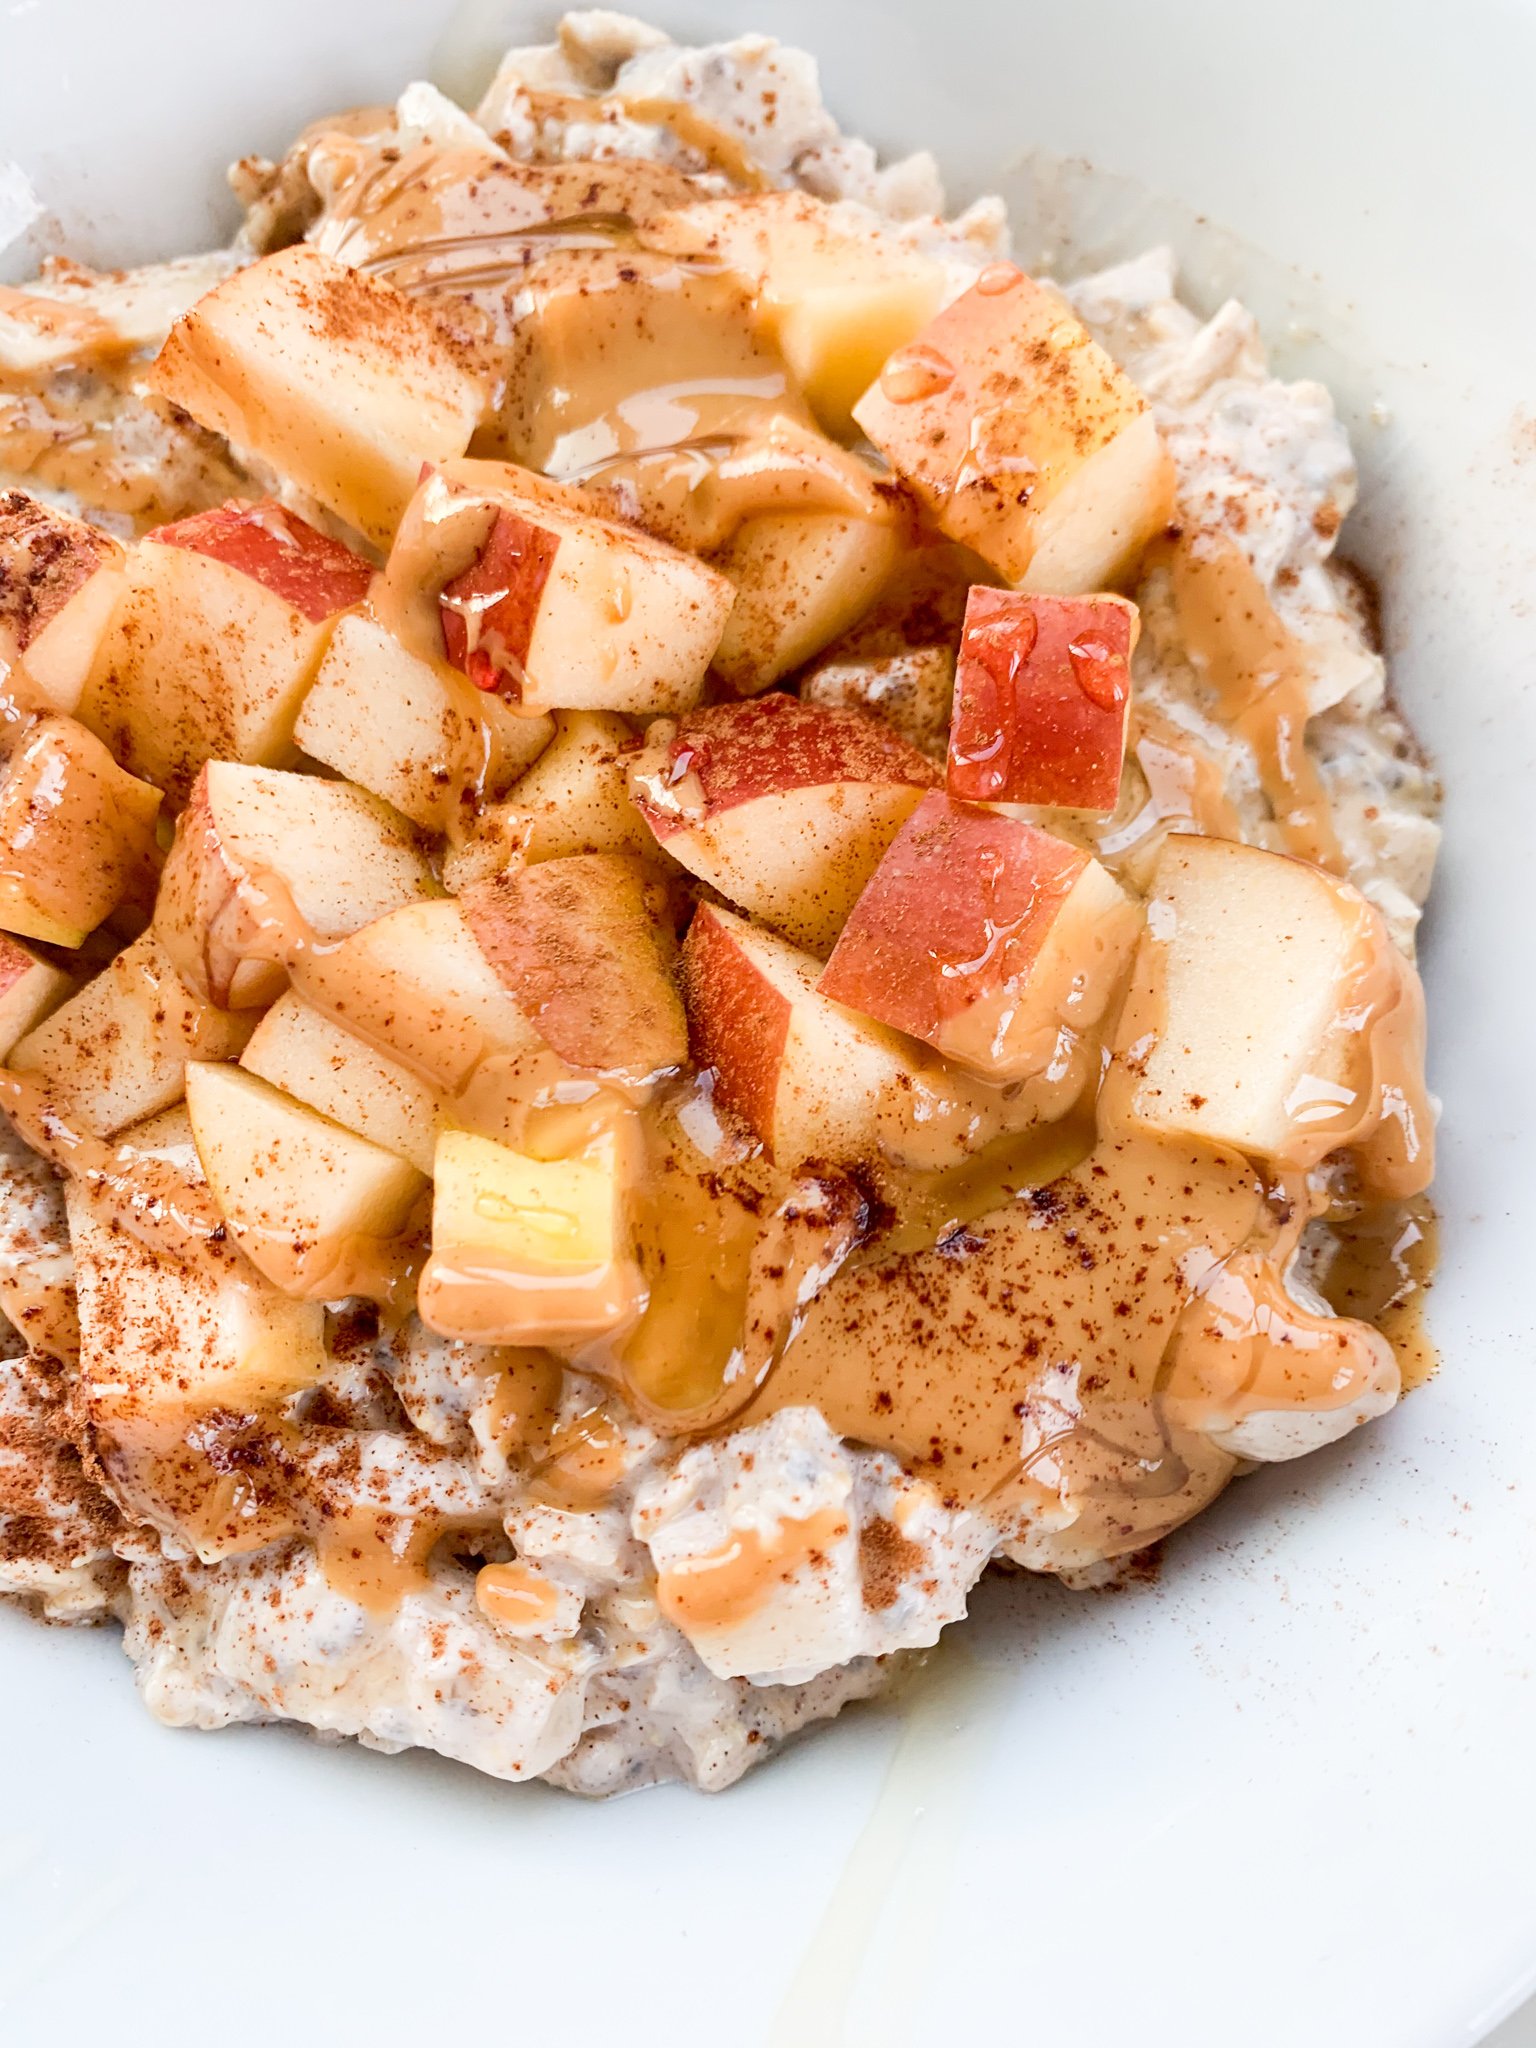 Apple Pie Overnight Oats - All the Healthy Things